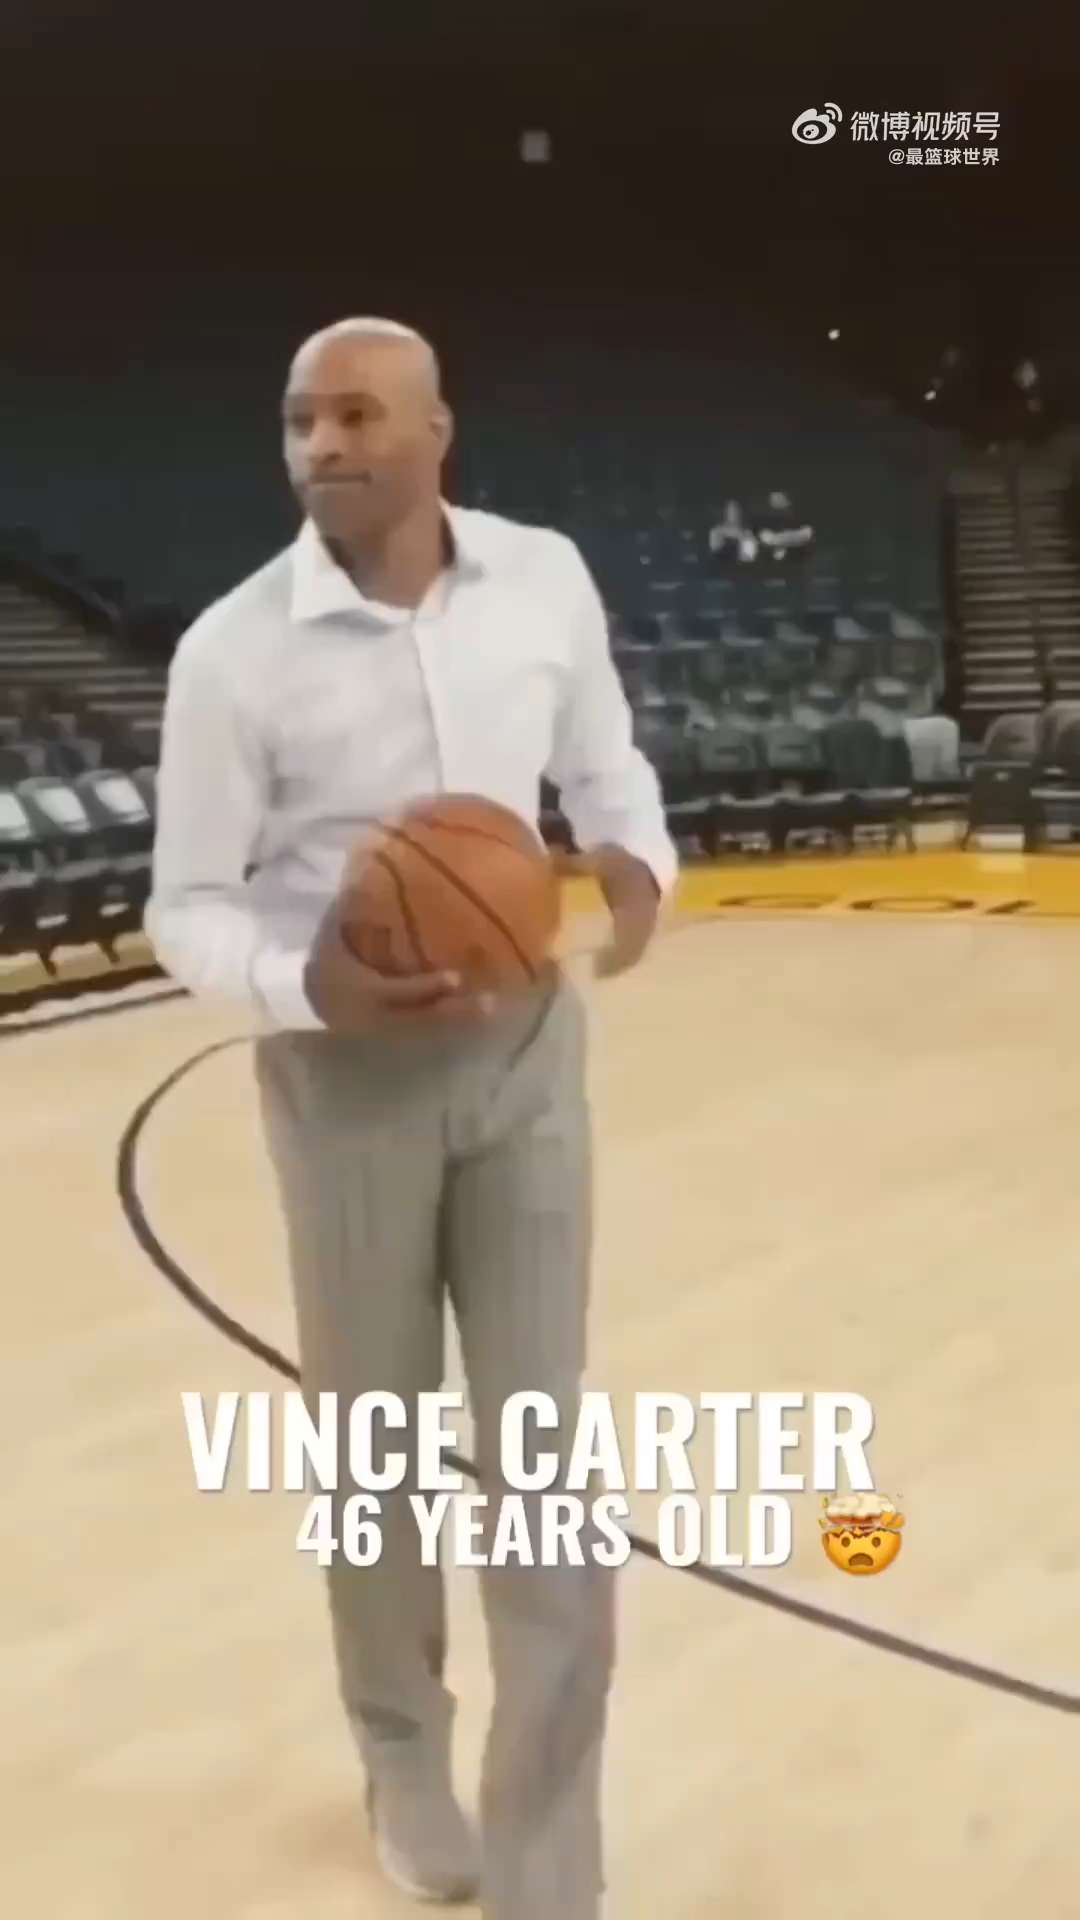 46 year old Vincent Carter performs a back dunk short MP4 video